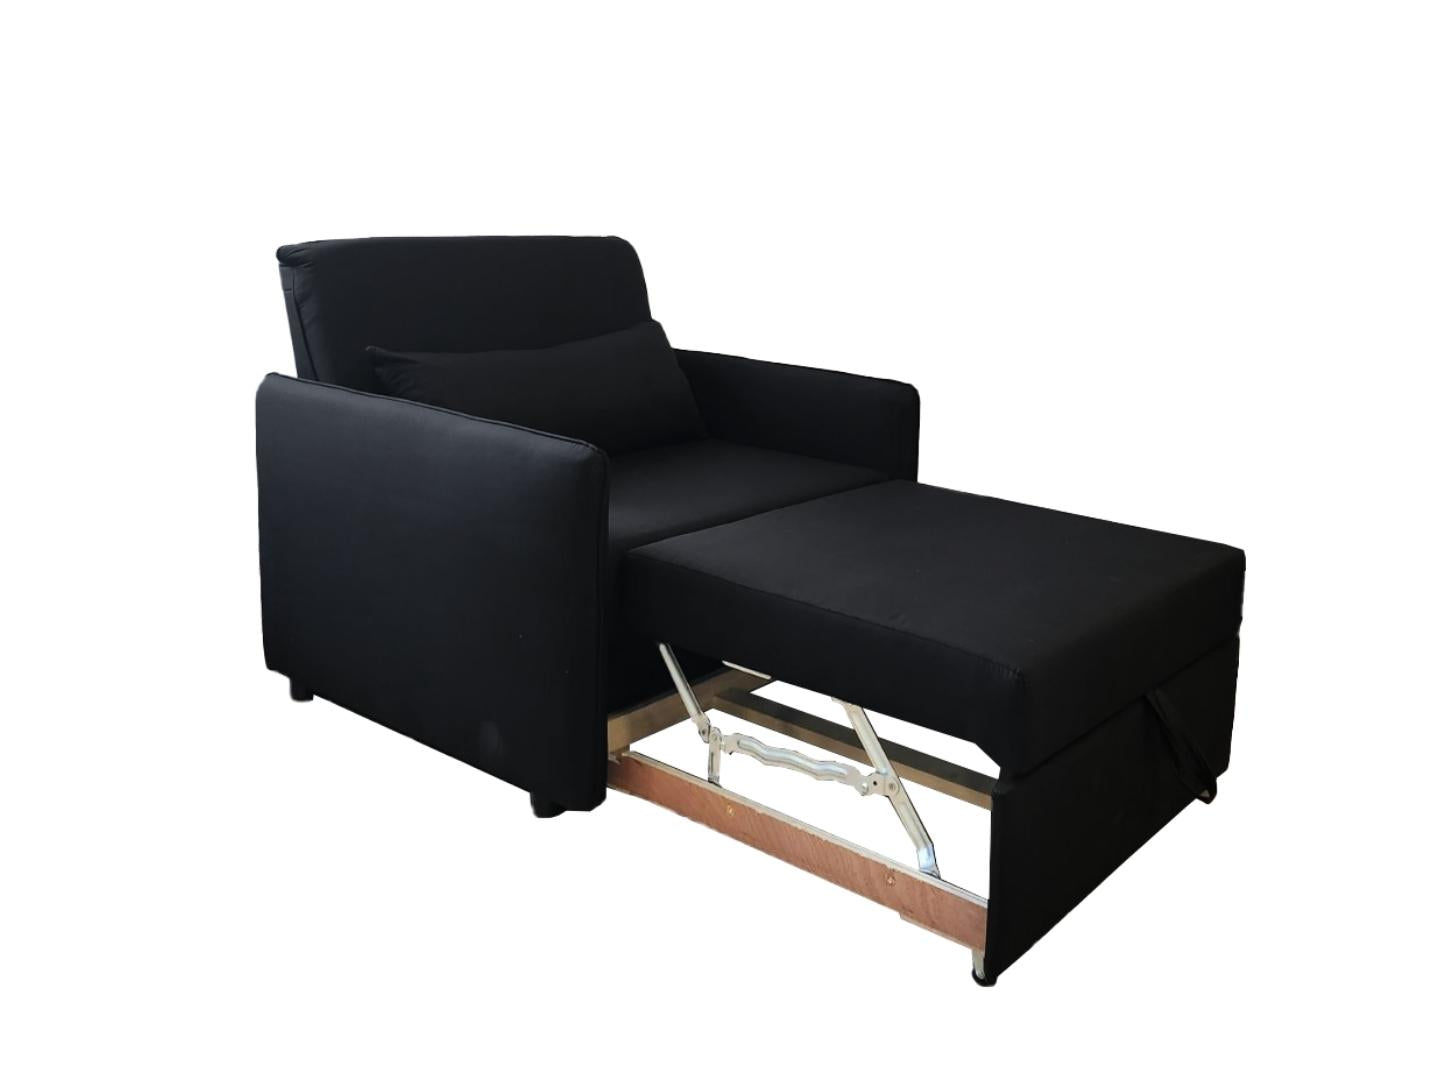 armchair single bed recliner sofa bed - Lux Furniture